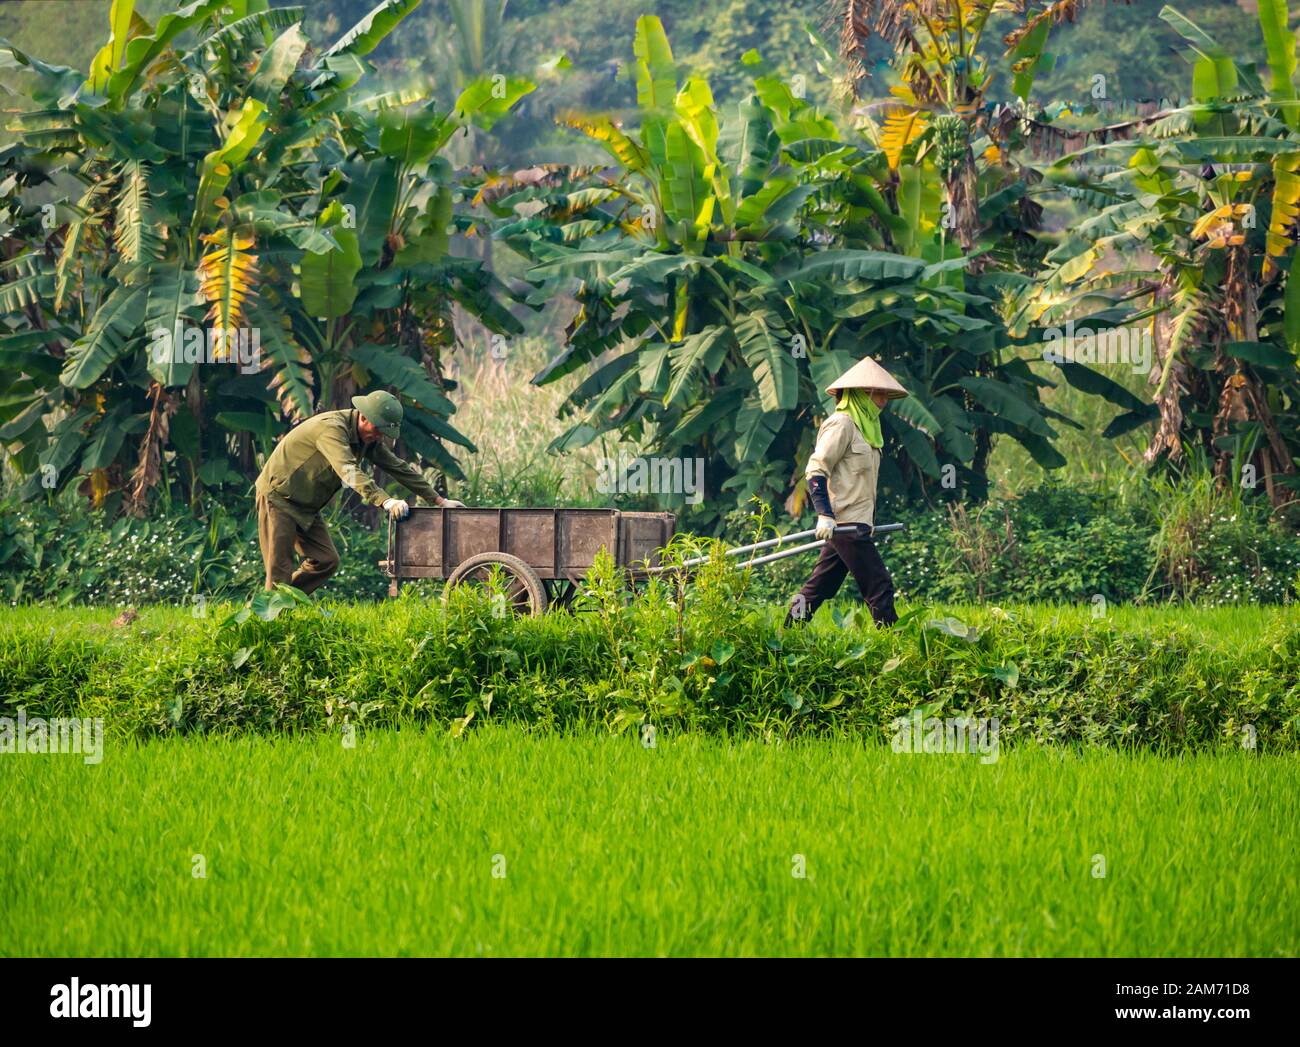 Local Asian man and woman wearing conical hat with old cart working in rice paddy field, Tam Coc, Ninh Binh, Vietnam, Asia Stock Photo